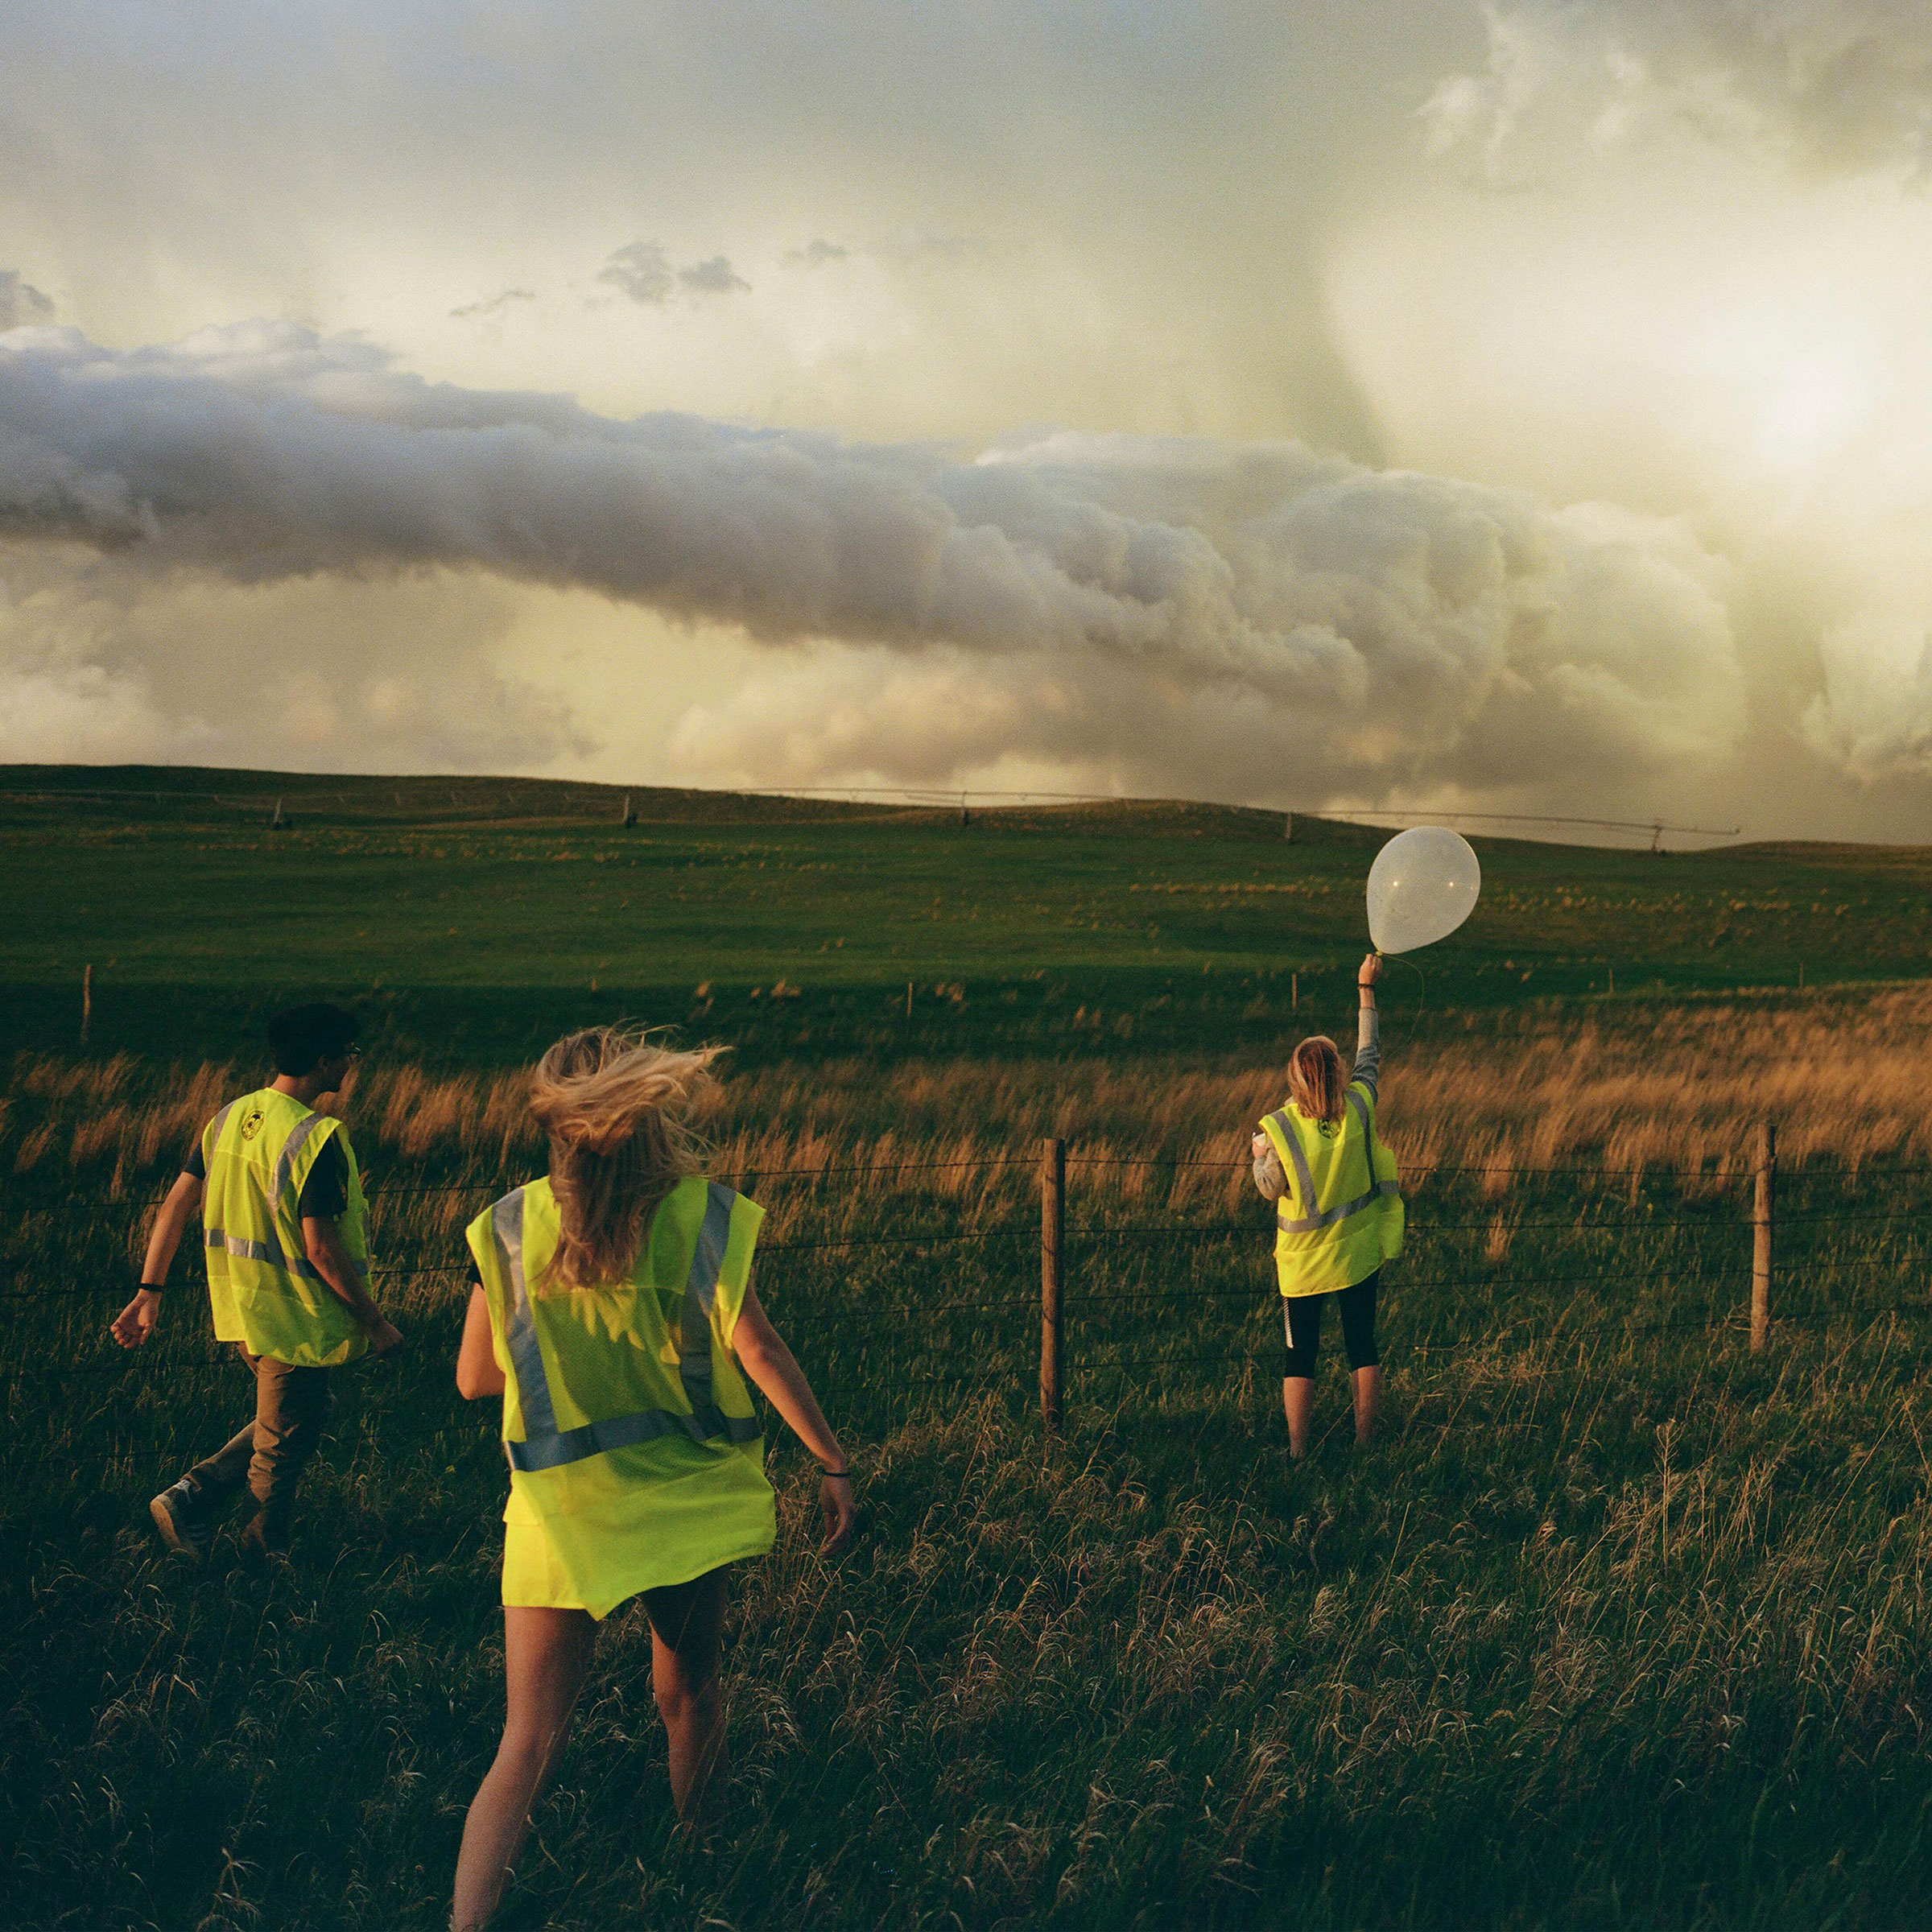 Morgan Schneider, a doctoral meteorology student at the University of Oklahoma, and her team launch a weather balloon near Hyannis, Neb. on June 6. (Erinn Springer—The New York Times/Redux)